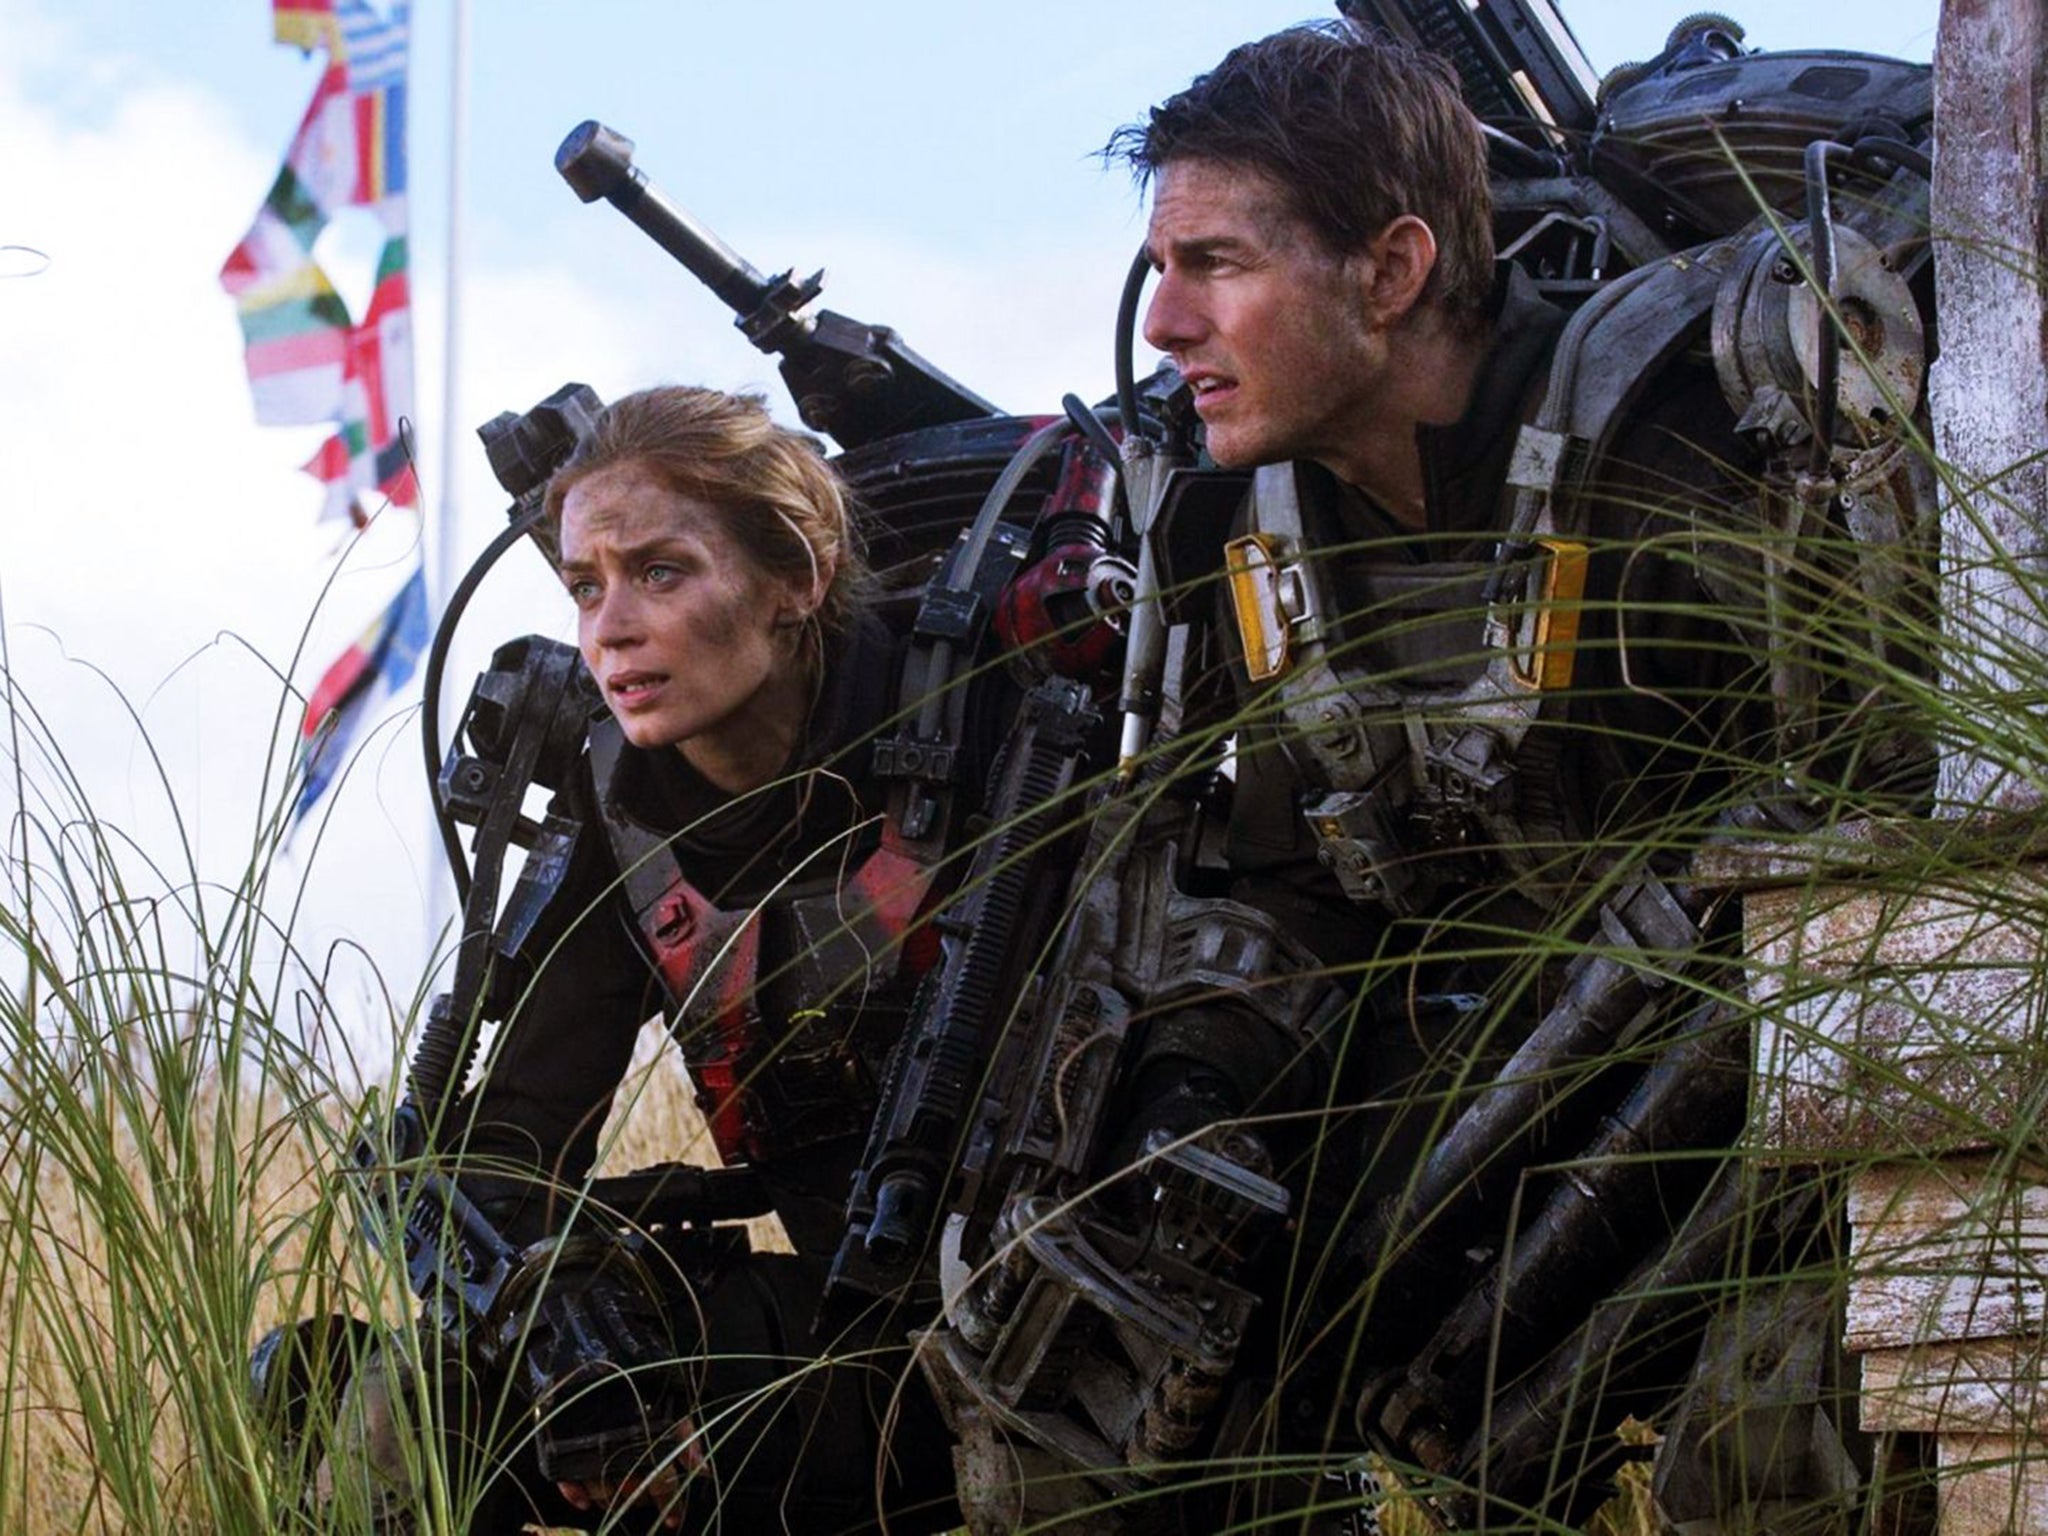 Edge of Tomorrow, film still scene with Emily Blunt and Tom Cruise